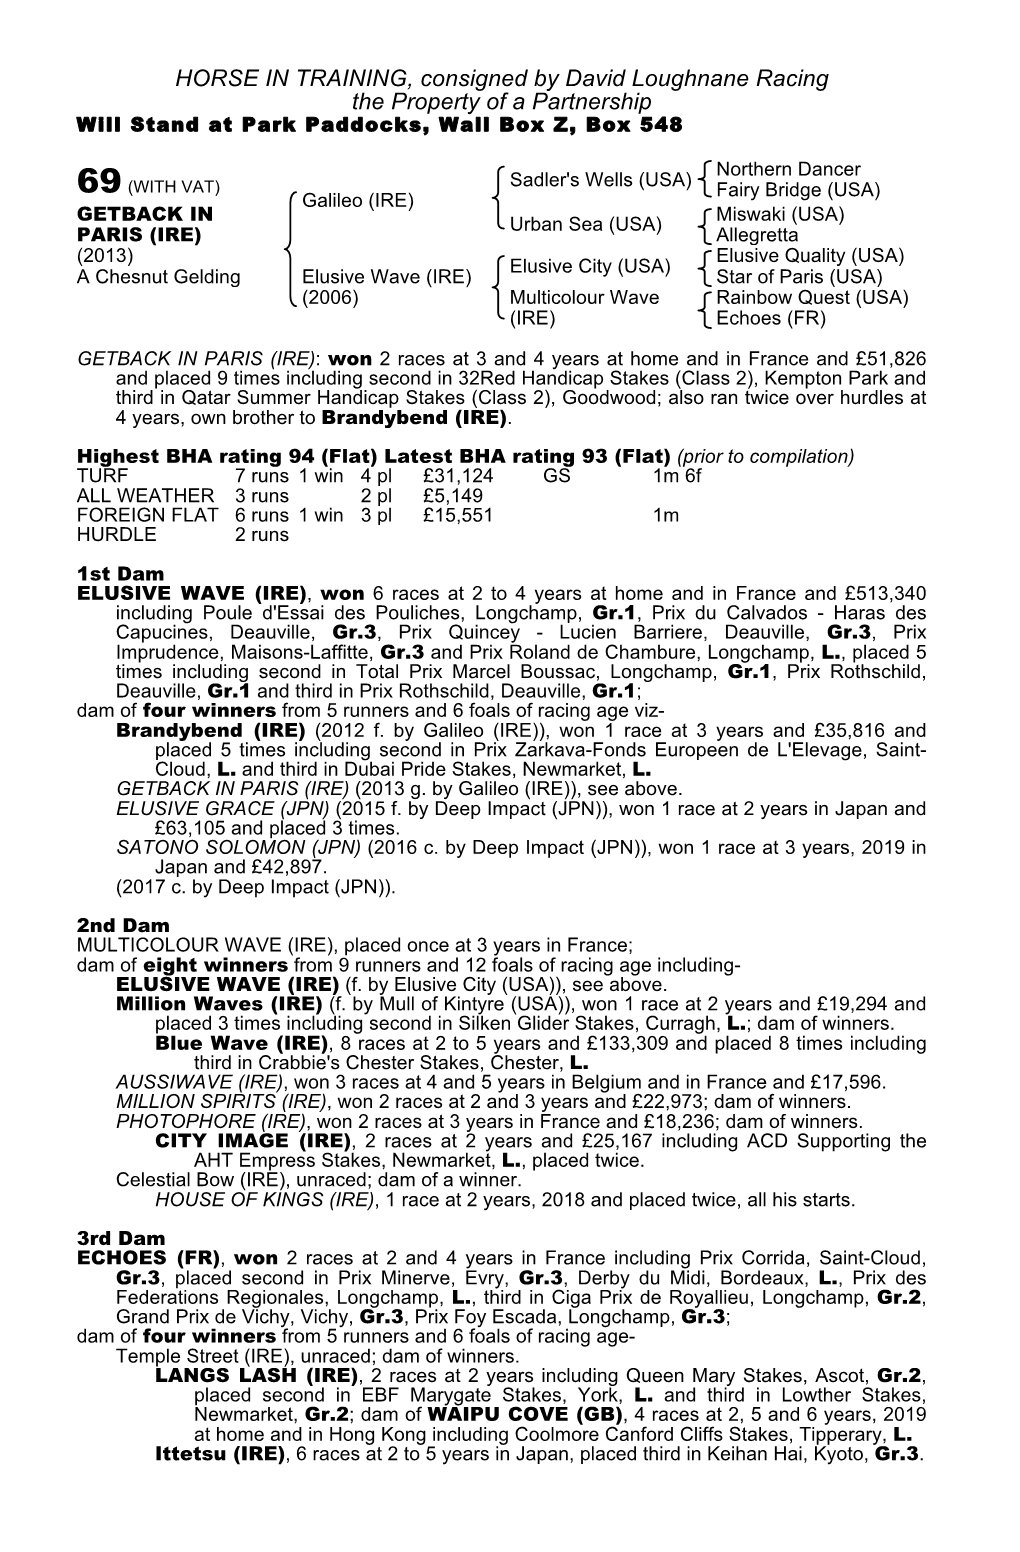 HORSE in TRAINING, Consigned by David Loughnane Racing the Property of a Partnership Will Stand at Park Paddocks, Wall Box Z, Box 548